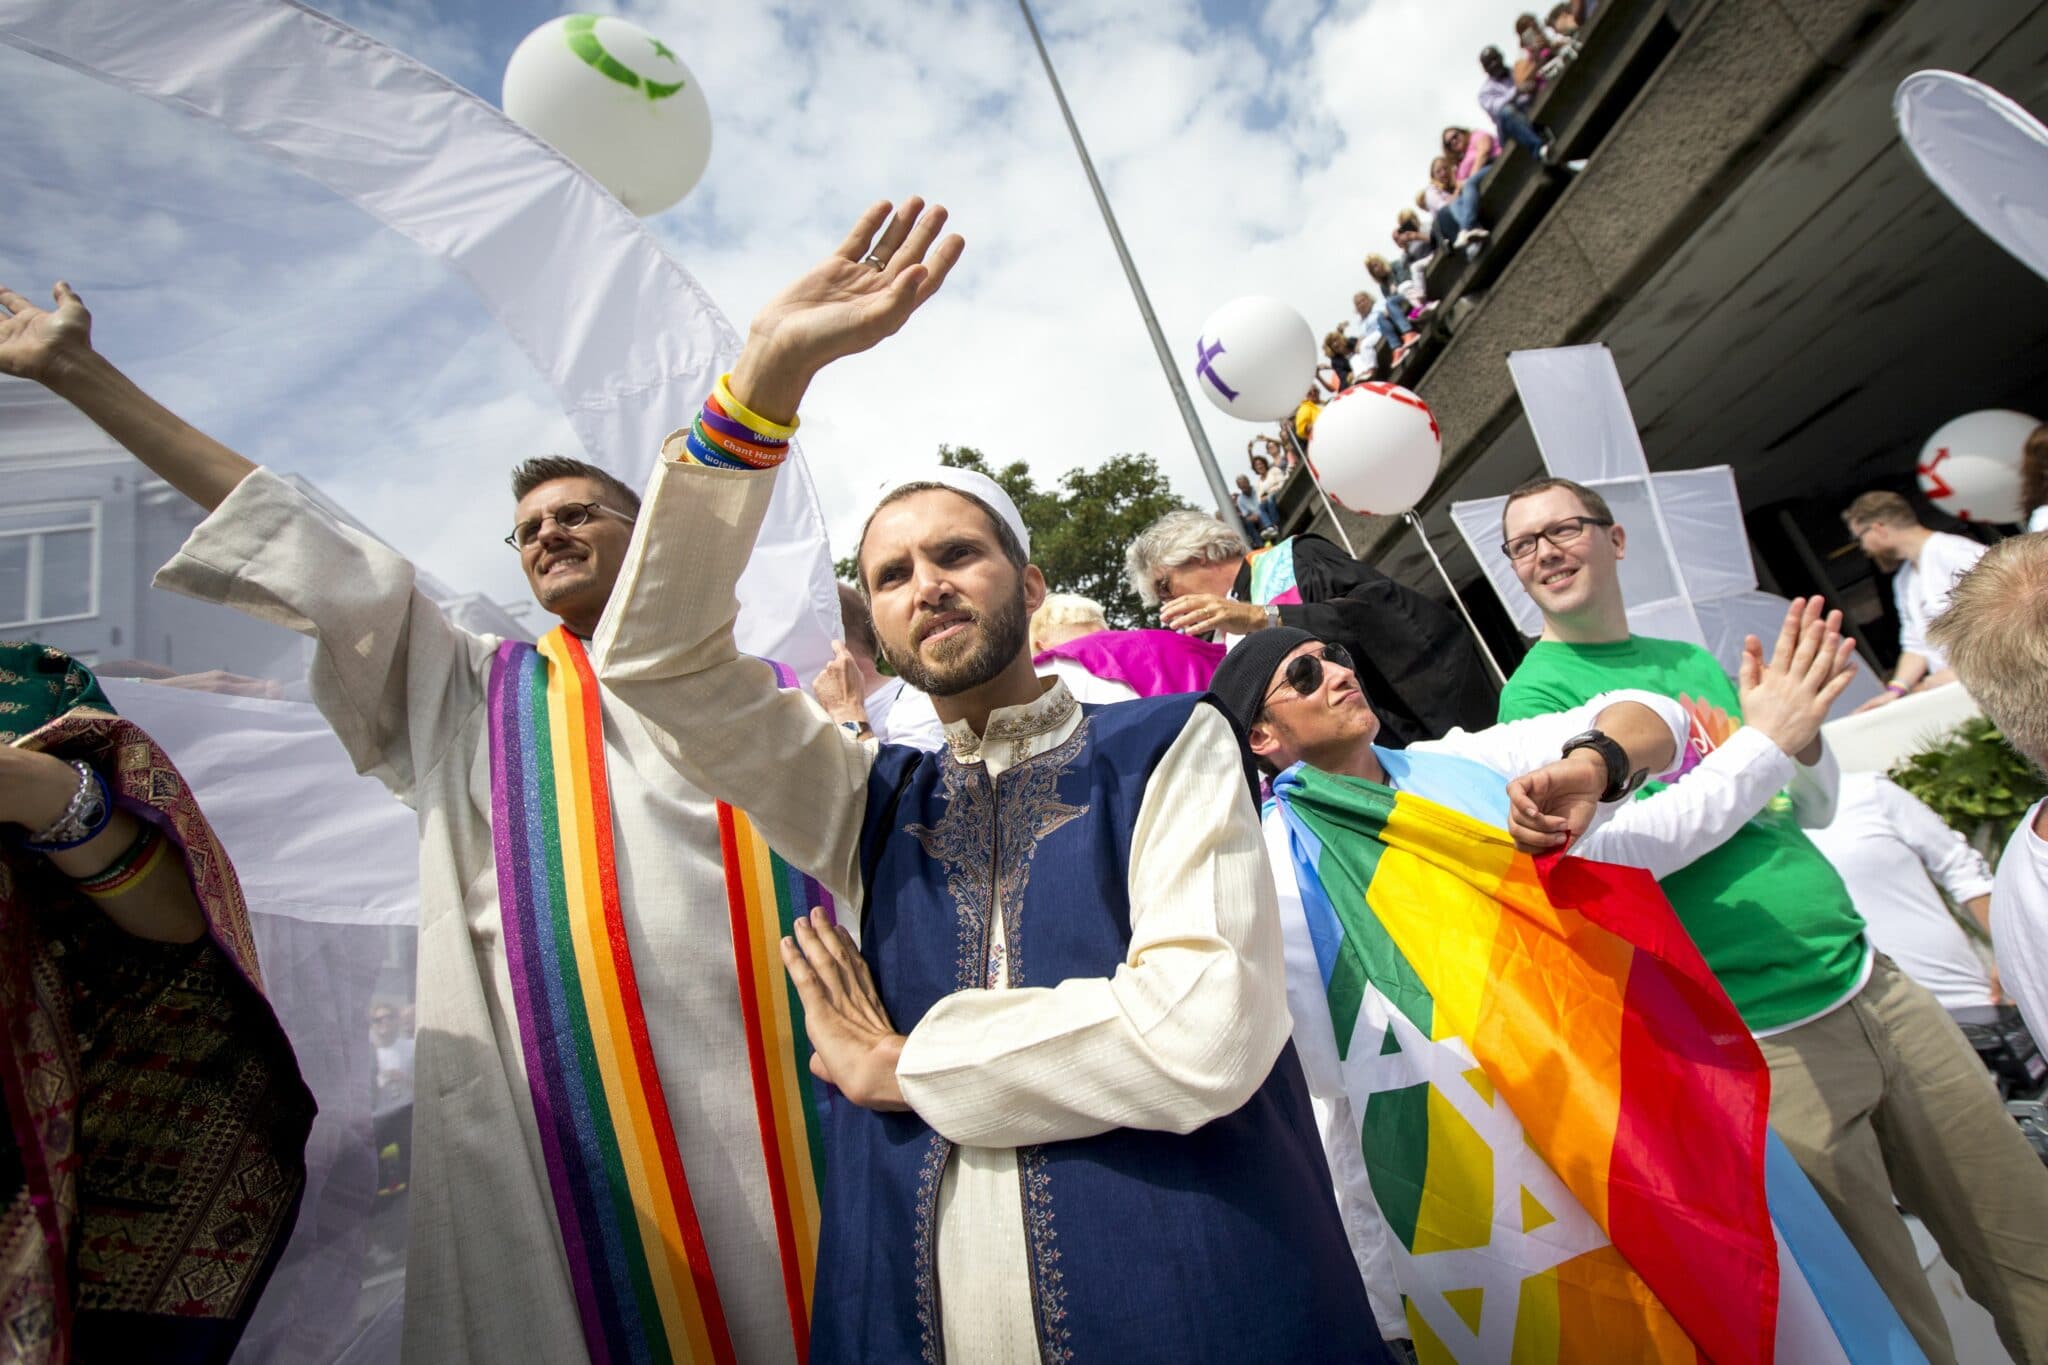 Openly gay imam Ludovic Zahed